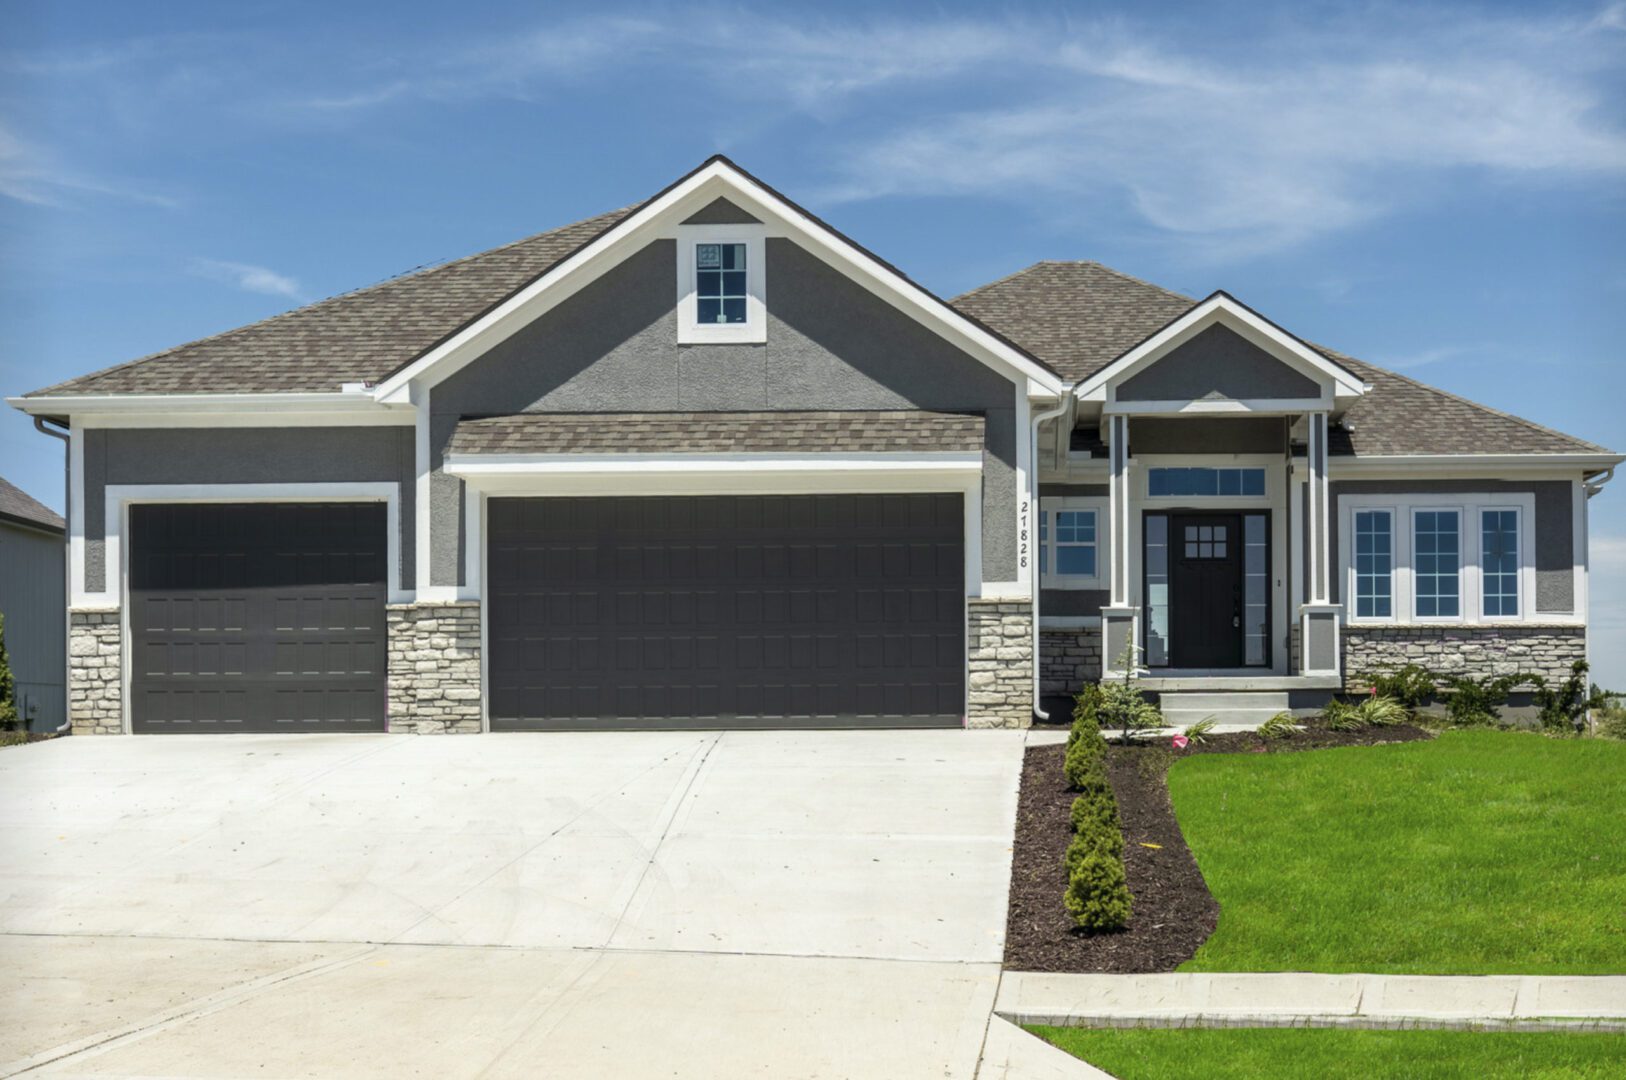 The exterior of a home with a garage and driveway.